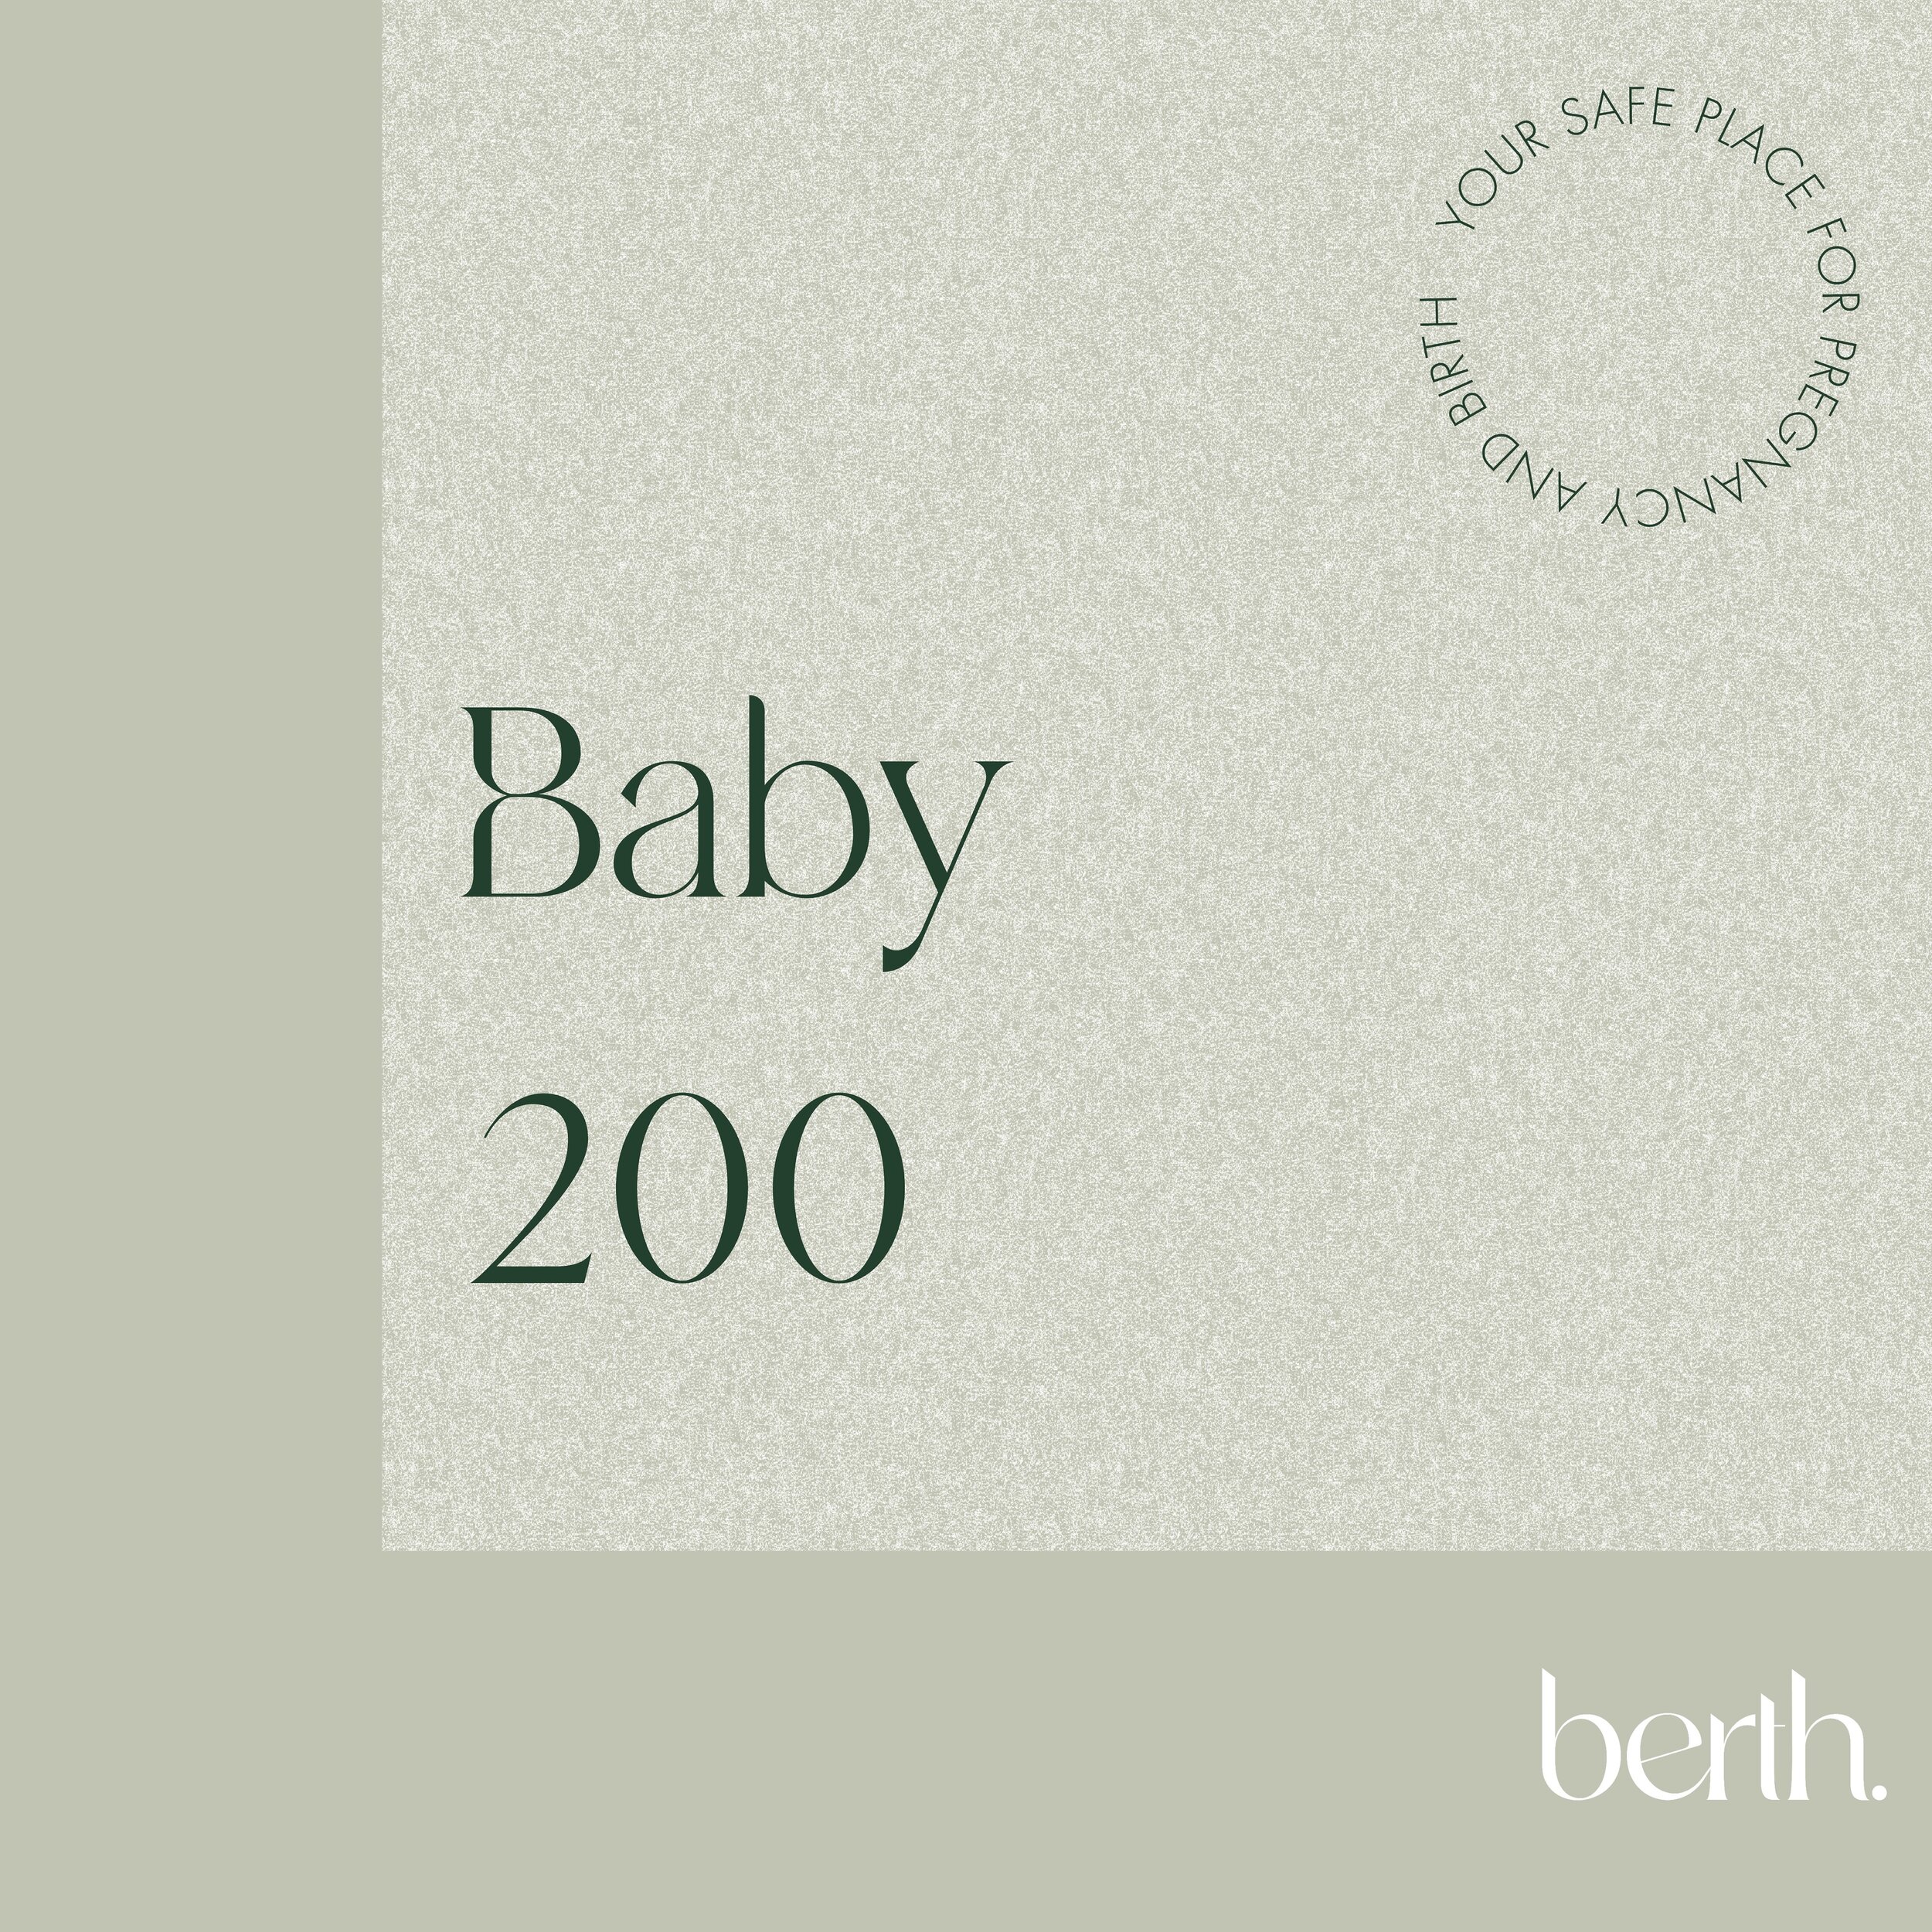 🎉 We are thrilled to celebrate our 200th bundle of joy at Berth! 🌟

Our 200th baby arrived safely over the weekend. 💖

Our incredible Obstetricians have helped deliver 102 beautiful baby boys and 98 adorable baby girls into the world.

Here&rsquo;